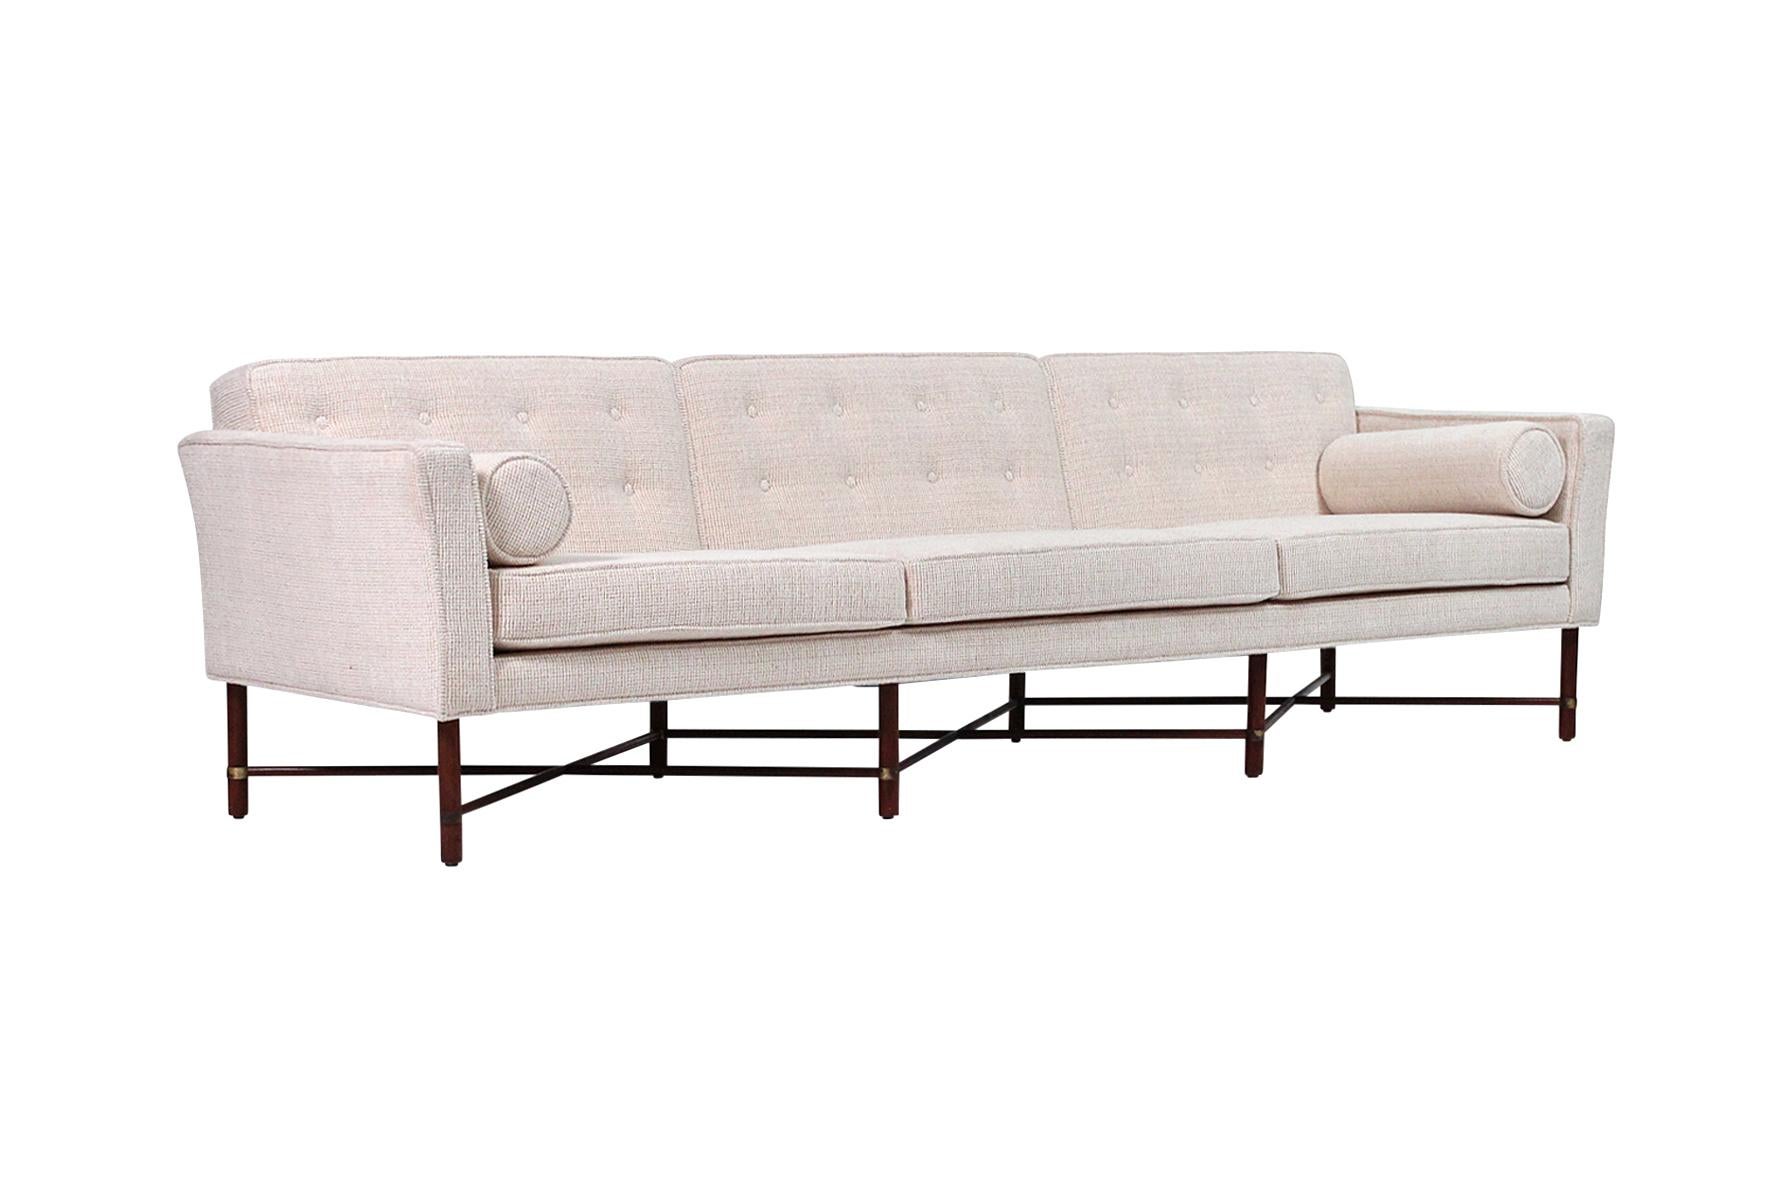 Rare Harvey Probber 3-seat sofa with criss cross base in solid walnut with brass accents. Fully restored.